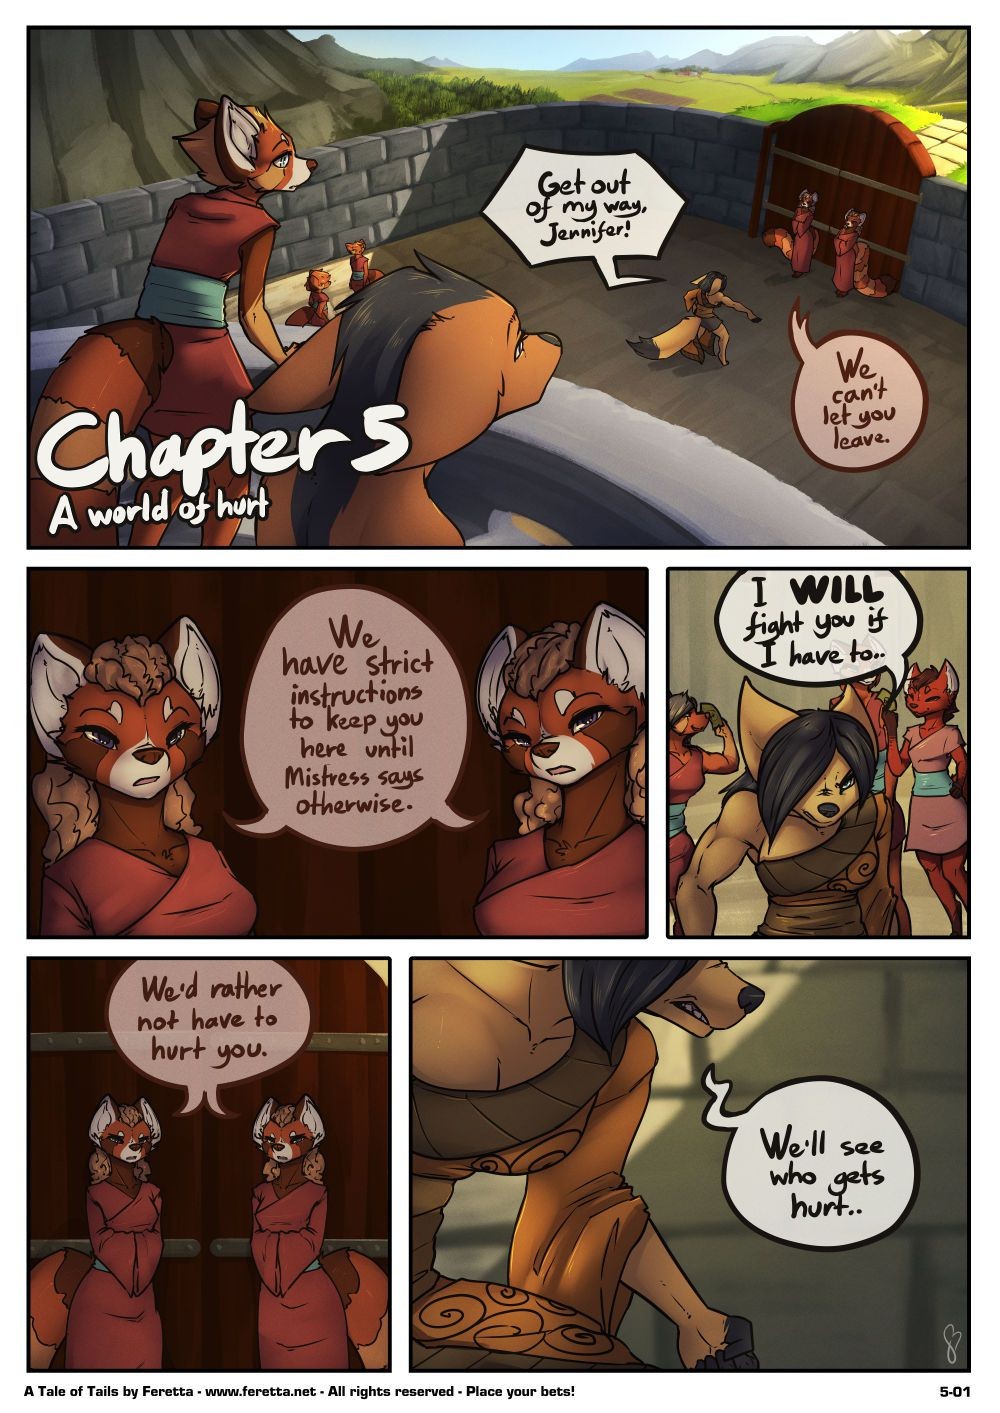 Ametur Porn [Feretta] A Tale Of Tails: Chapter 5 - A World Of Hurt (ongoing) Gay Brownhair